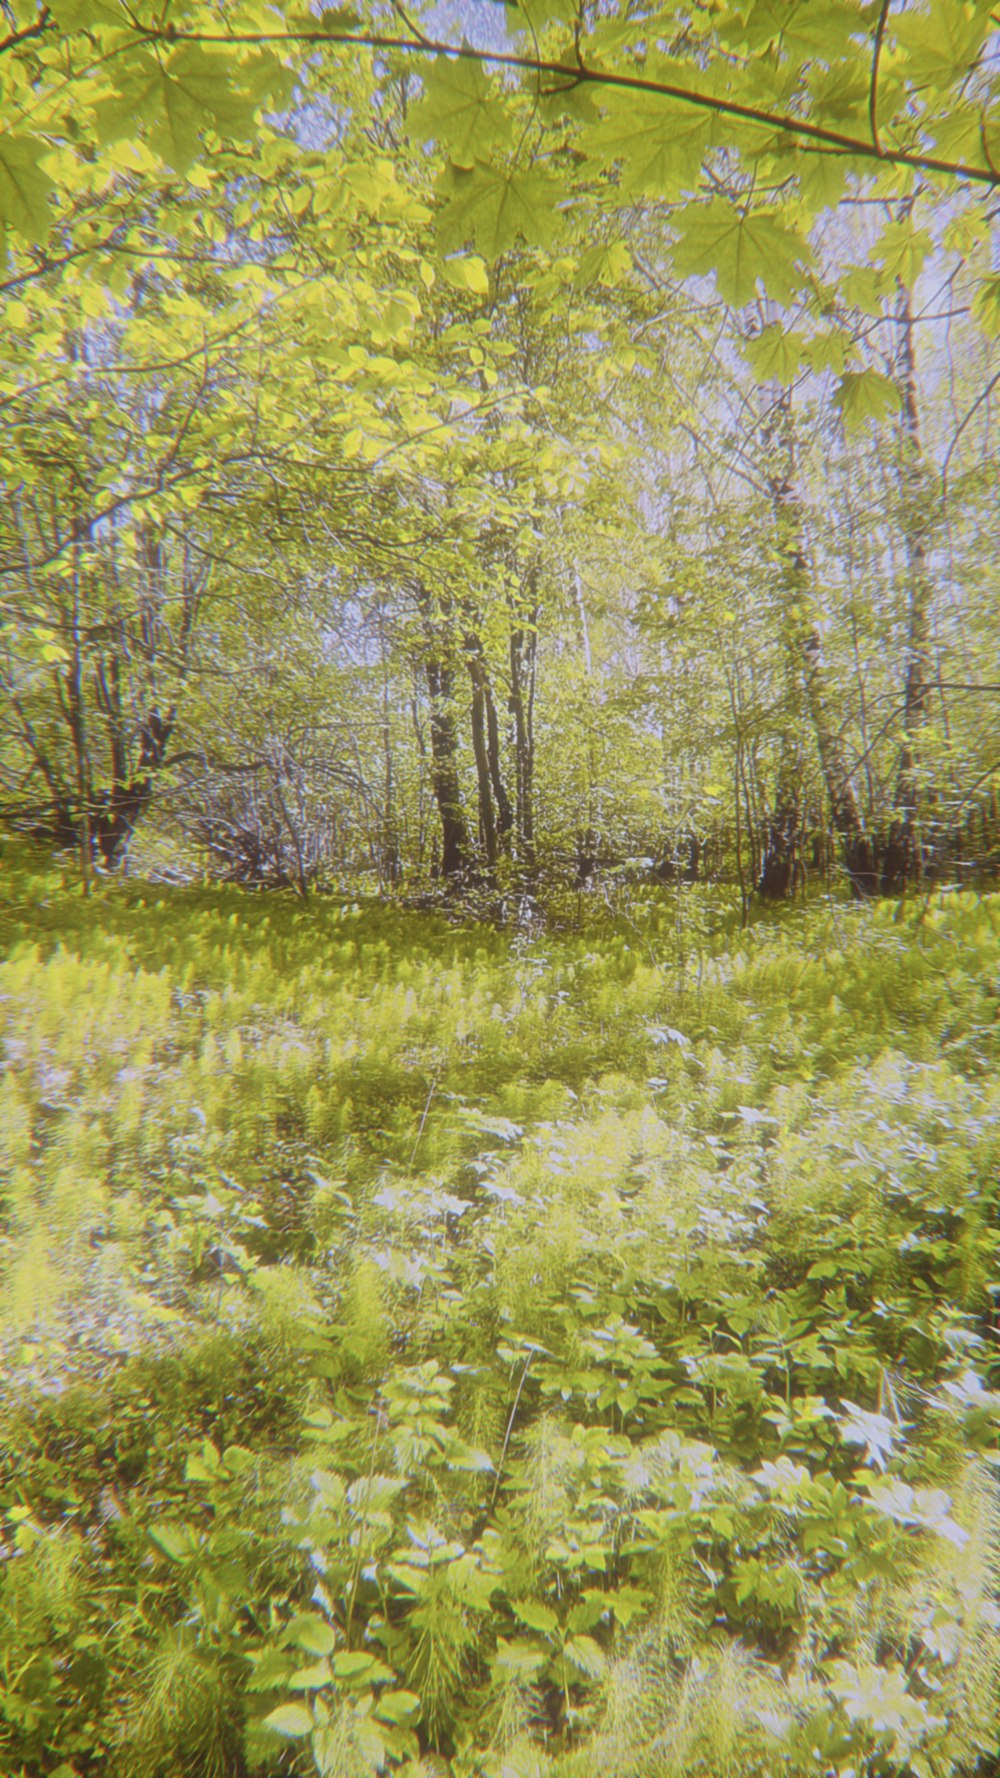 a blurry photo of a field with trees and grass